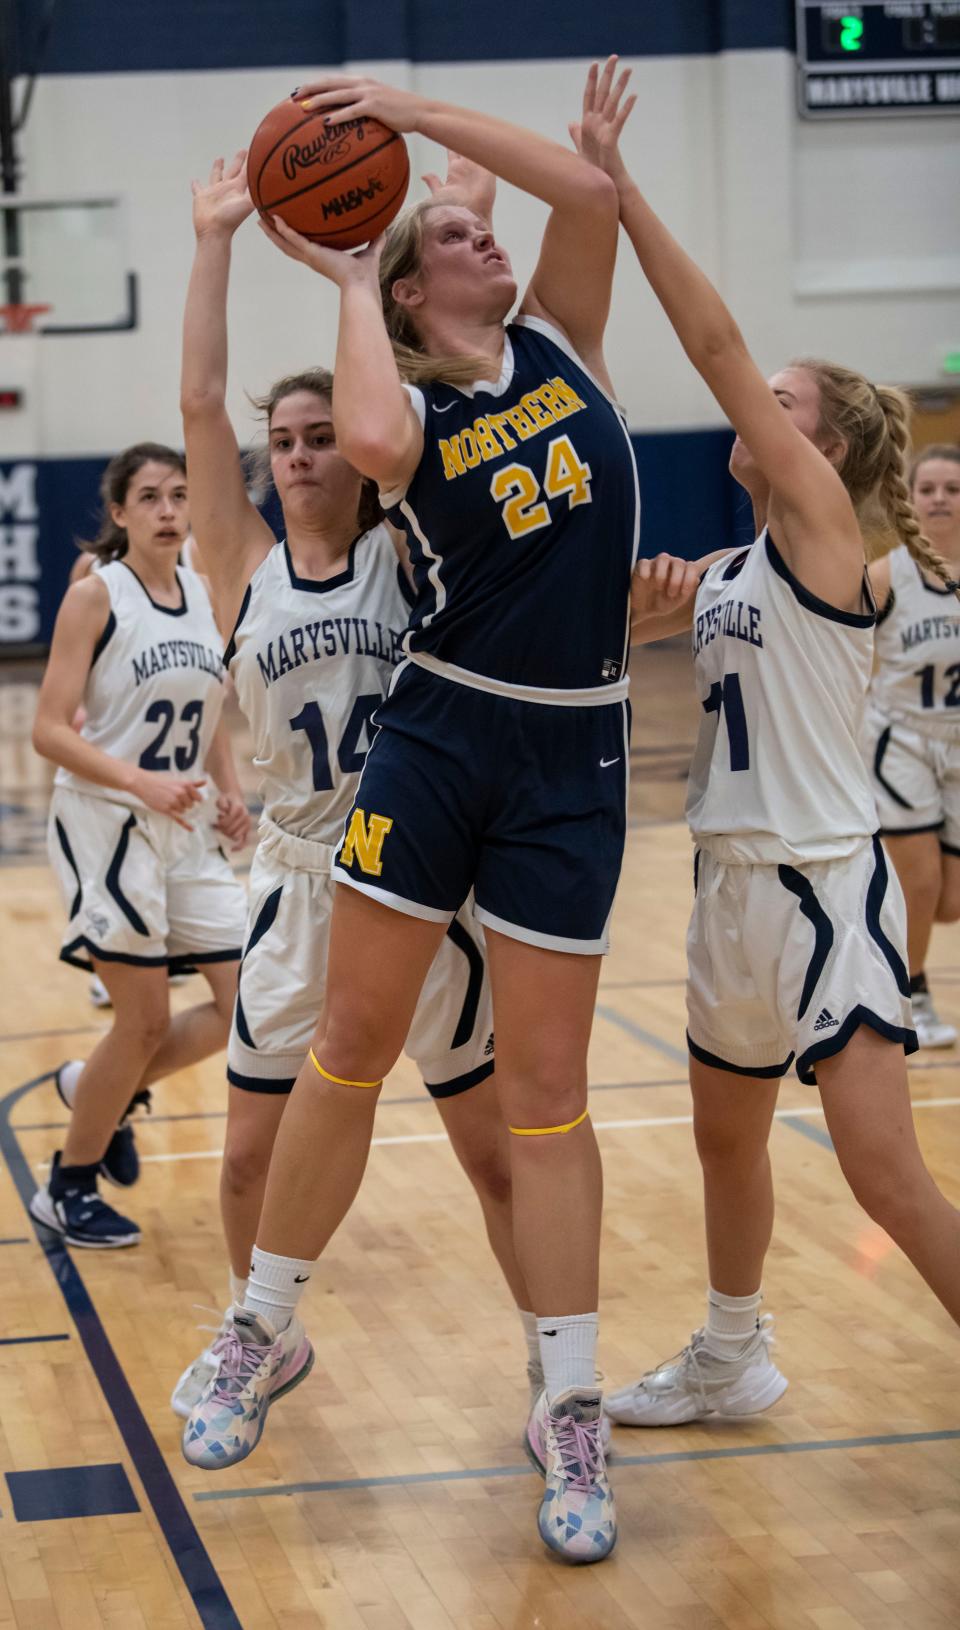 Port Huron Northern’s Jersey McGregor goes for a layup during a game earlier this season. The senior finished with a 12-point, 10-rebound double-double in the Huskies' 39-21 win over Grosse Pointe South on Tuesday.